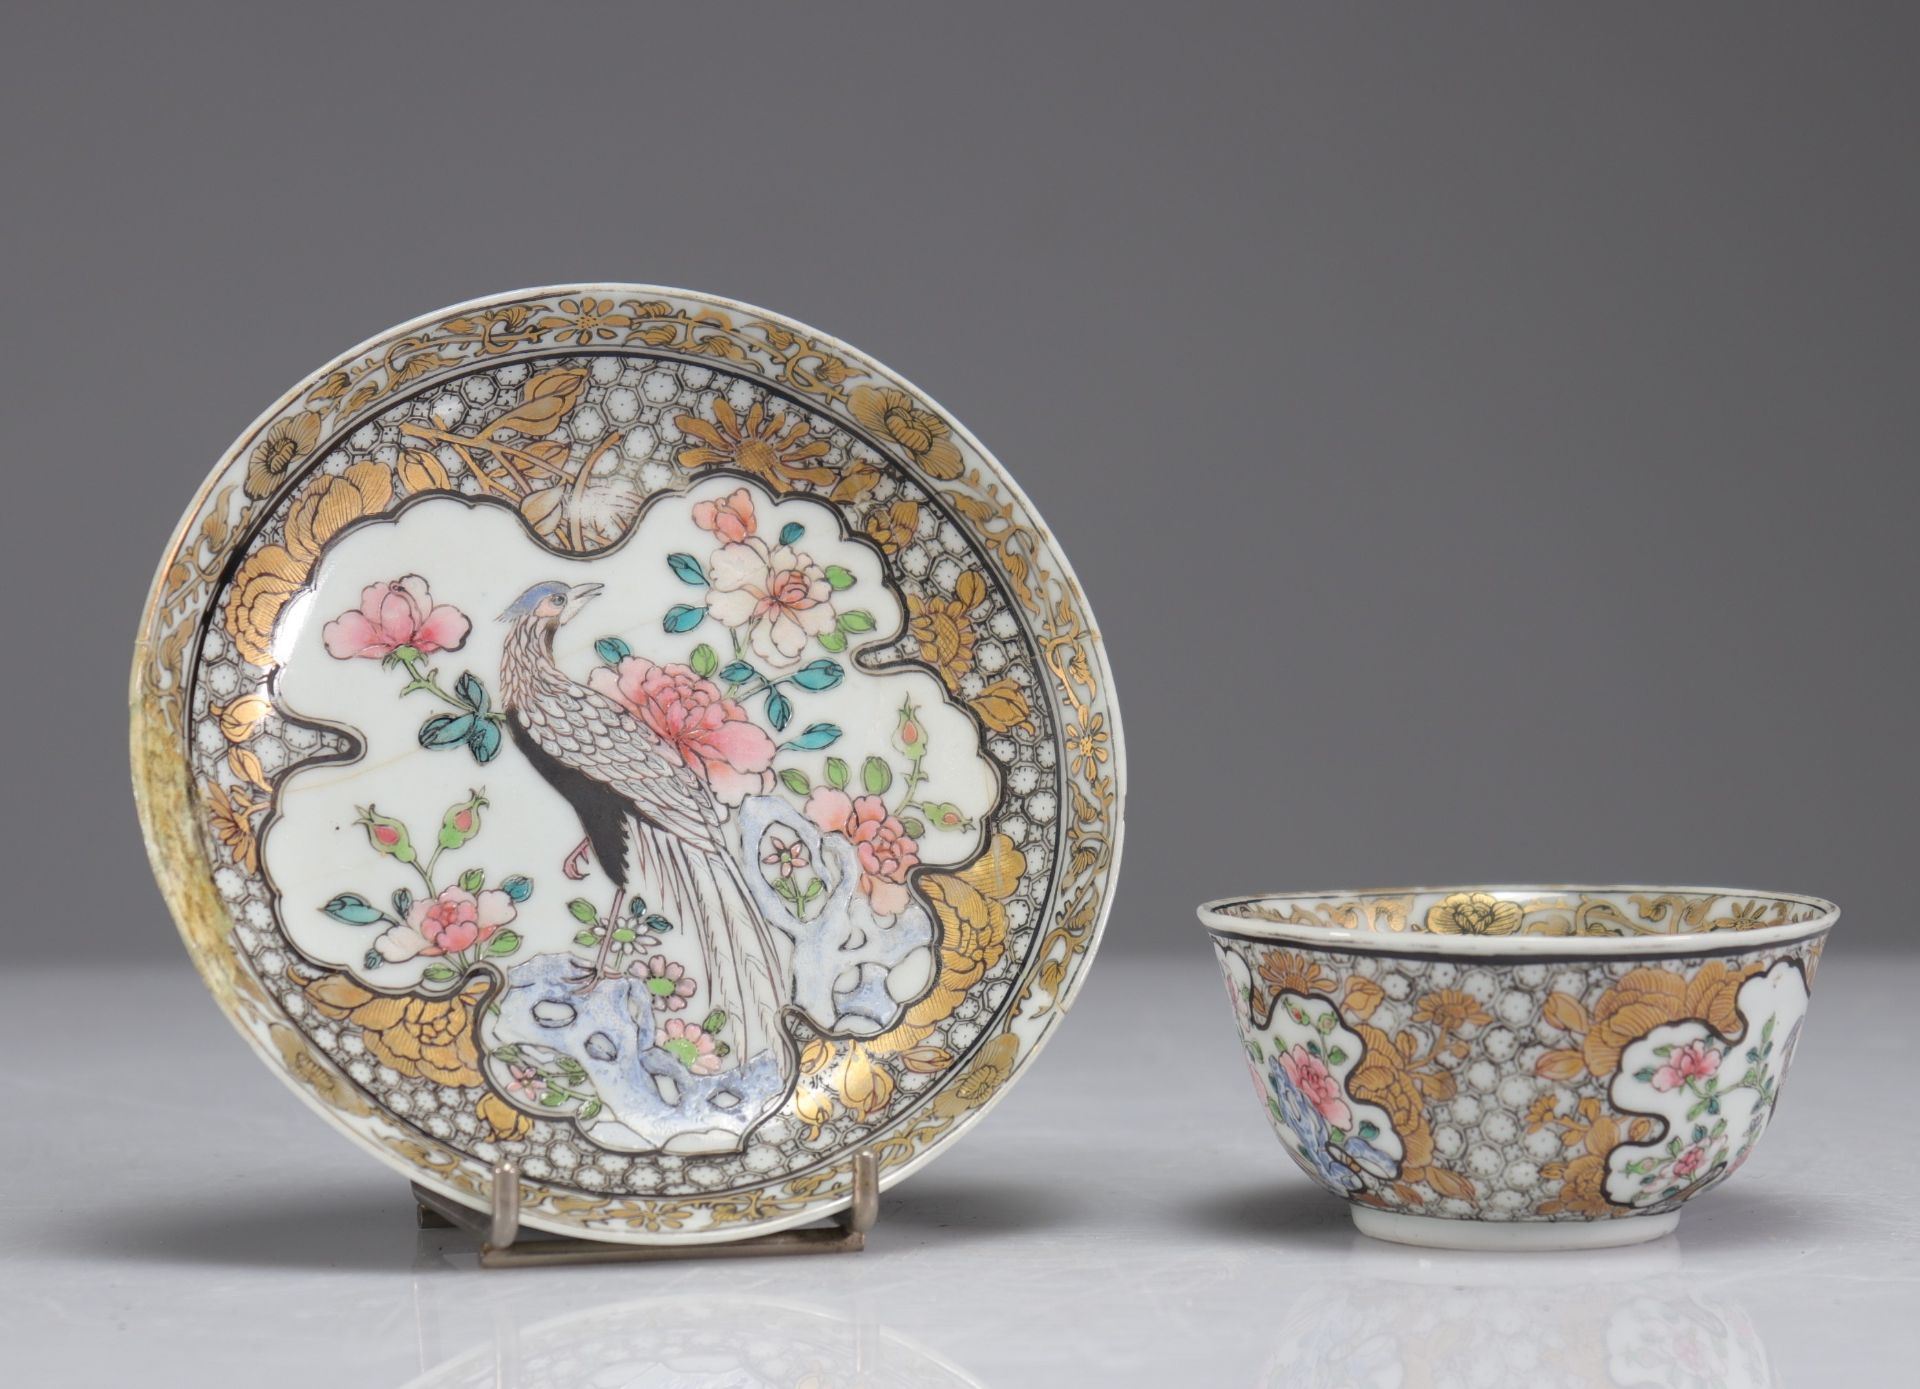 18th century famille rose porcelain bowls and plates (3) - Image 6 of 7